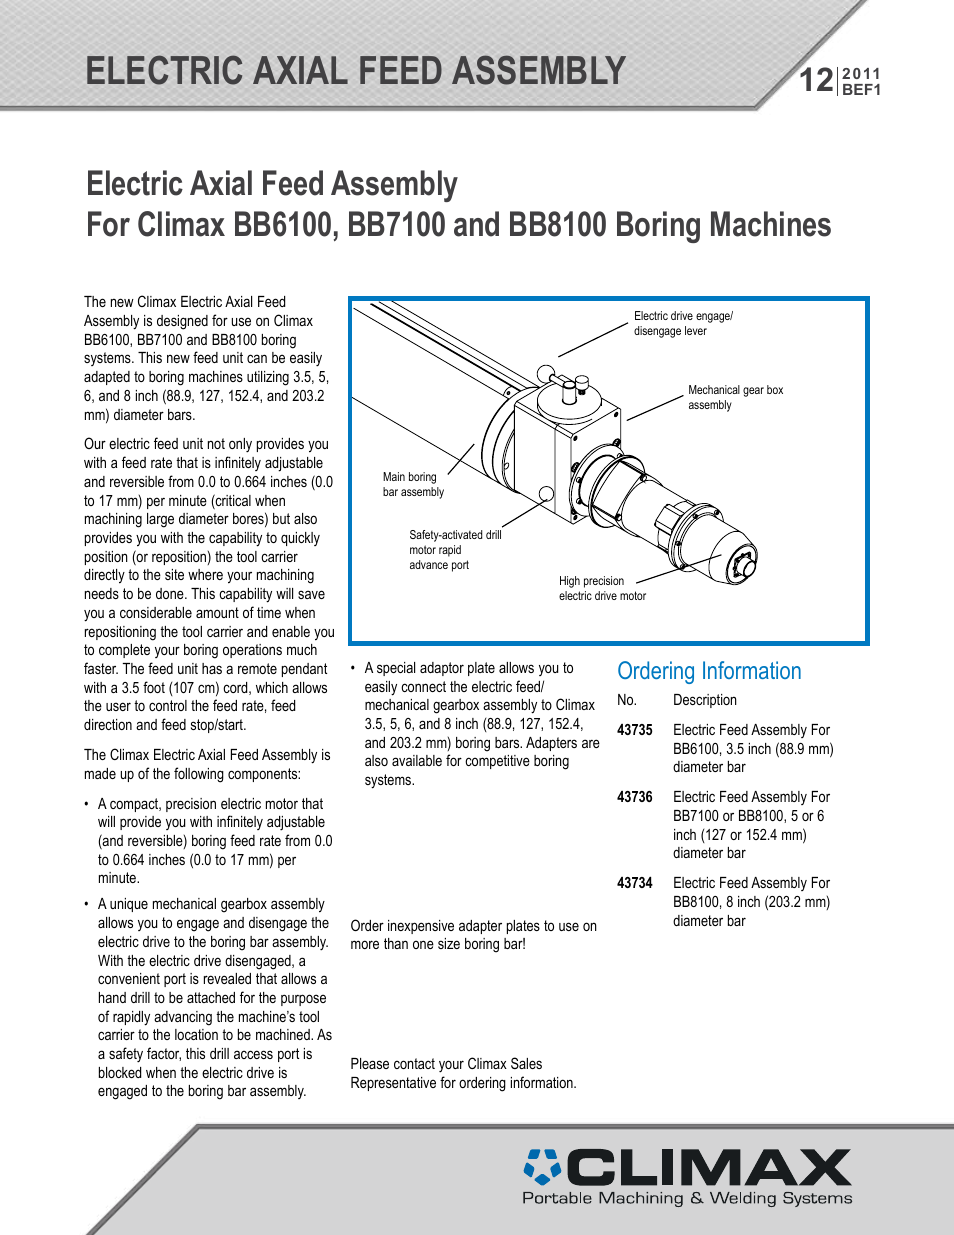 Electric axial feed assembly For BB6100, BB7100 and BB8100